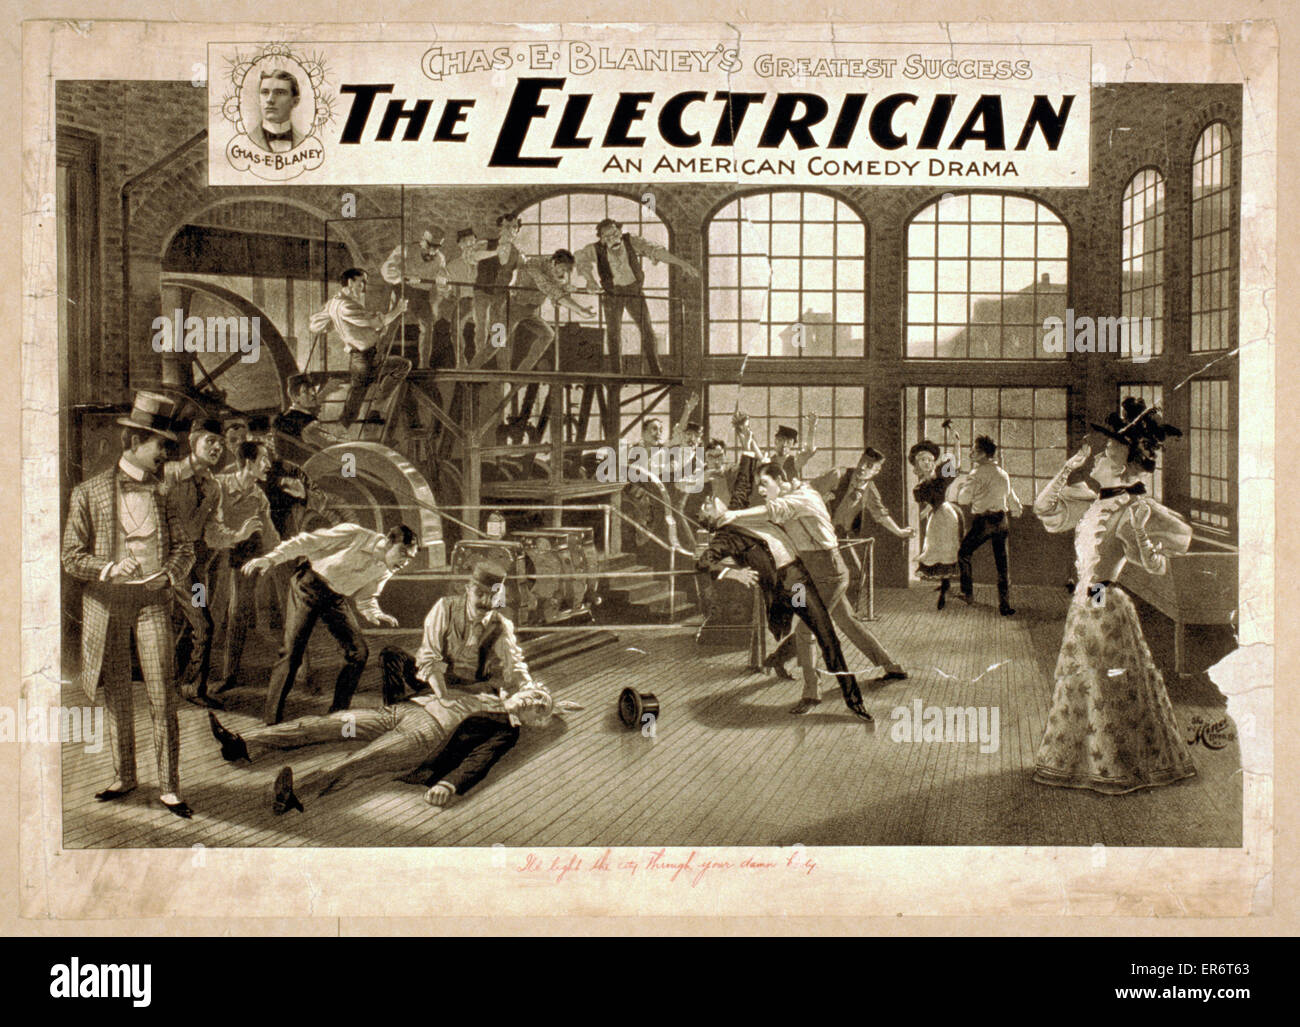 The electrician an American comedy drama : Chas. E. Blaney's Stock Photo